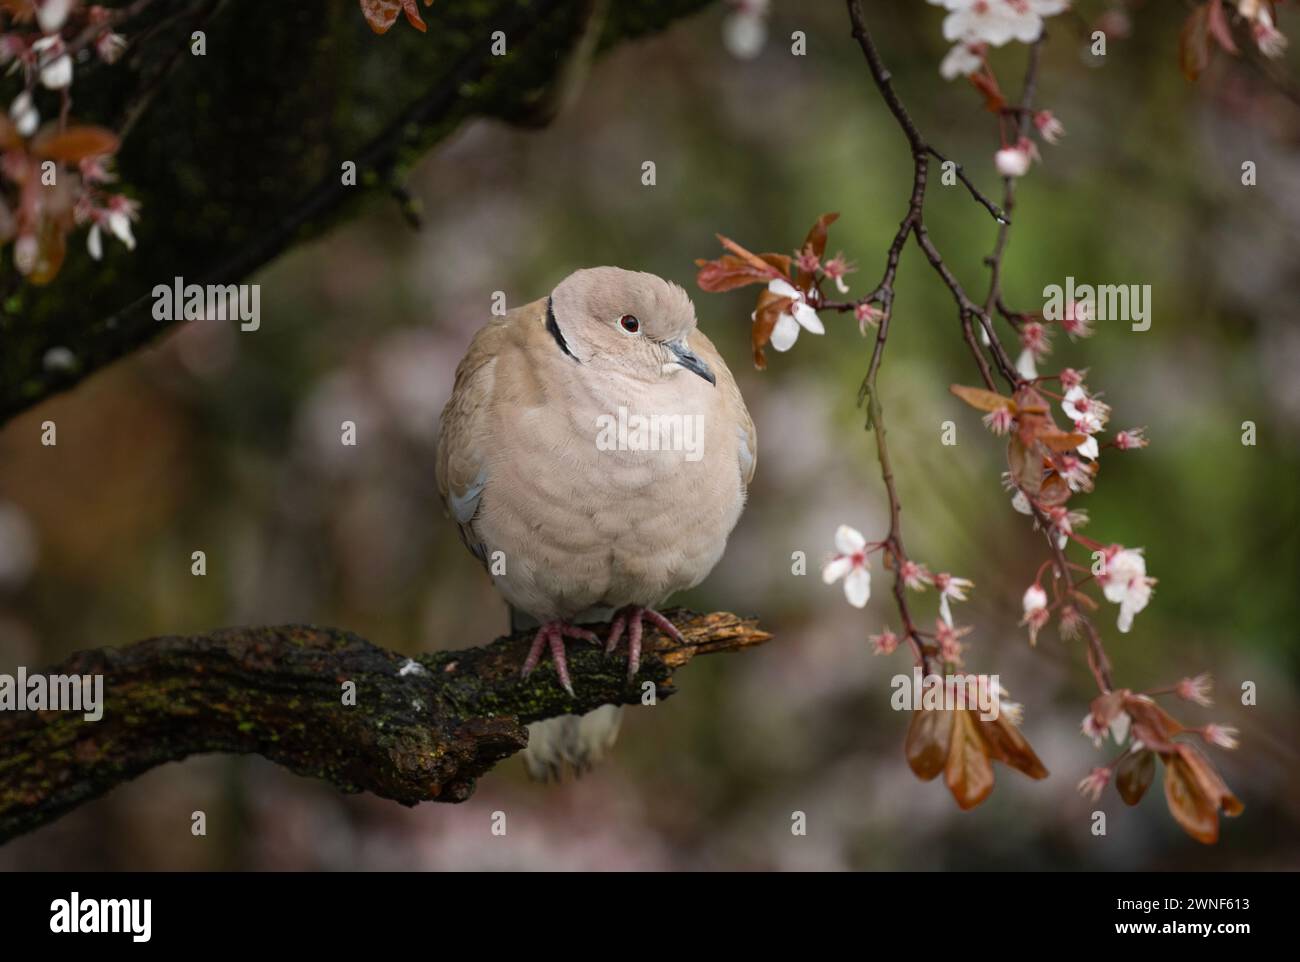 Collared Dove, also Eurasian Collared Dove, Streptopelia decaocto, adult perched on blossom tree in early spring, Regent's Park, London,United Kingdom Stock Photo